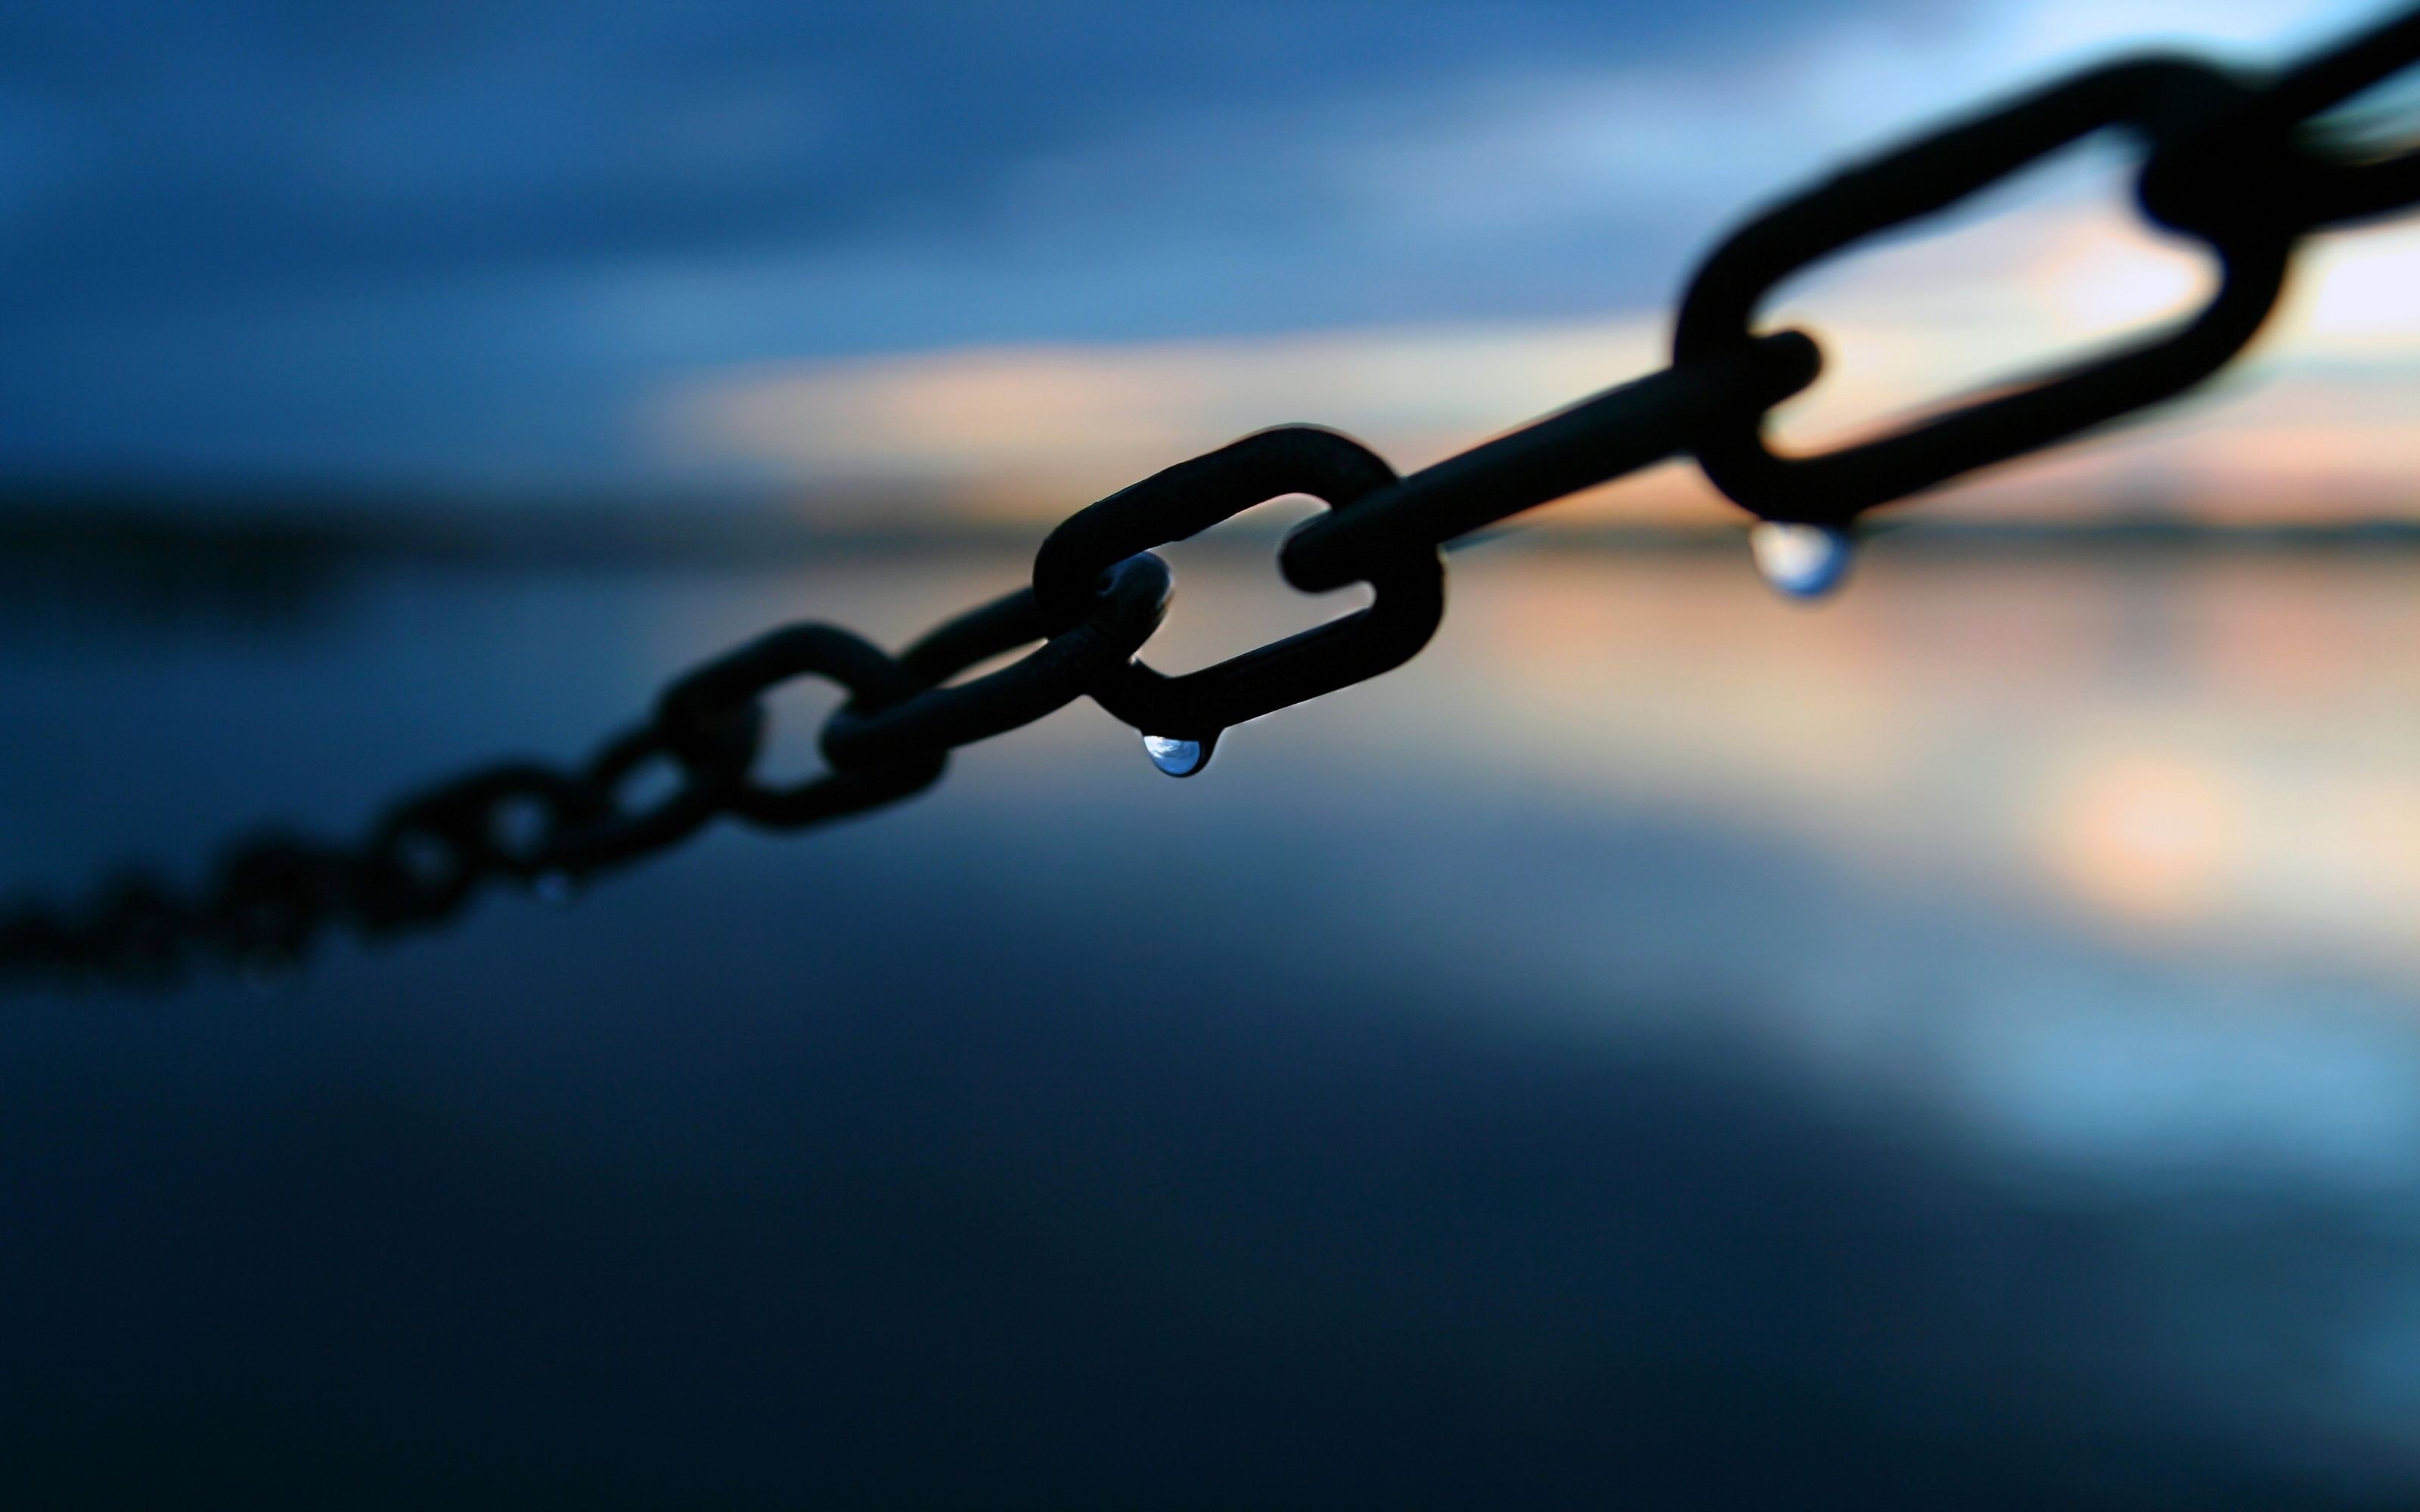 photography, Depth of field, Sea, Water, Chains, Water drops Wallpaper